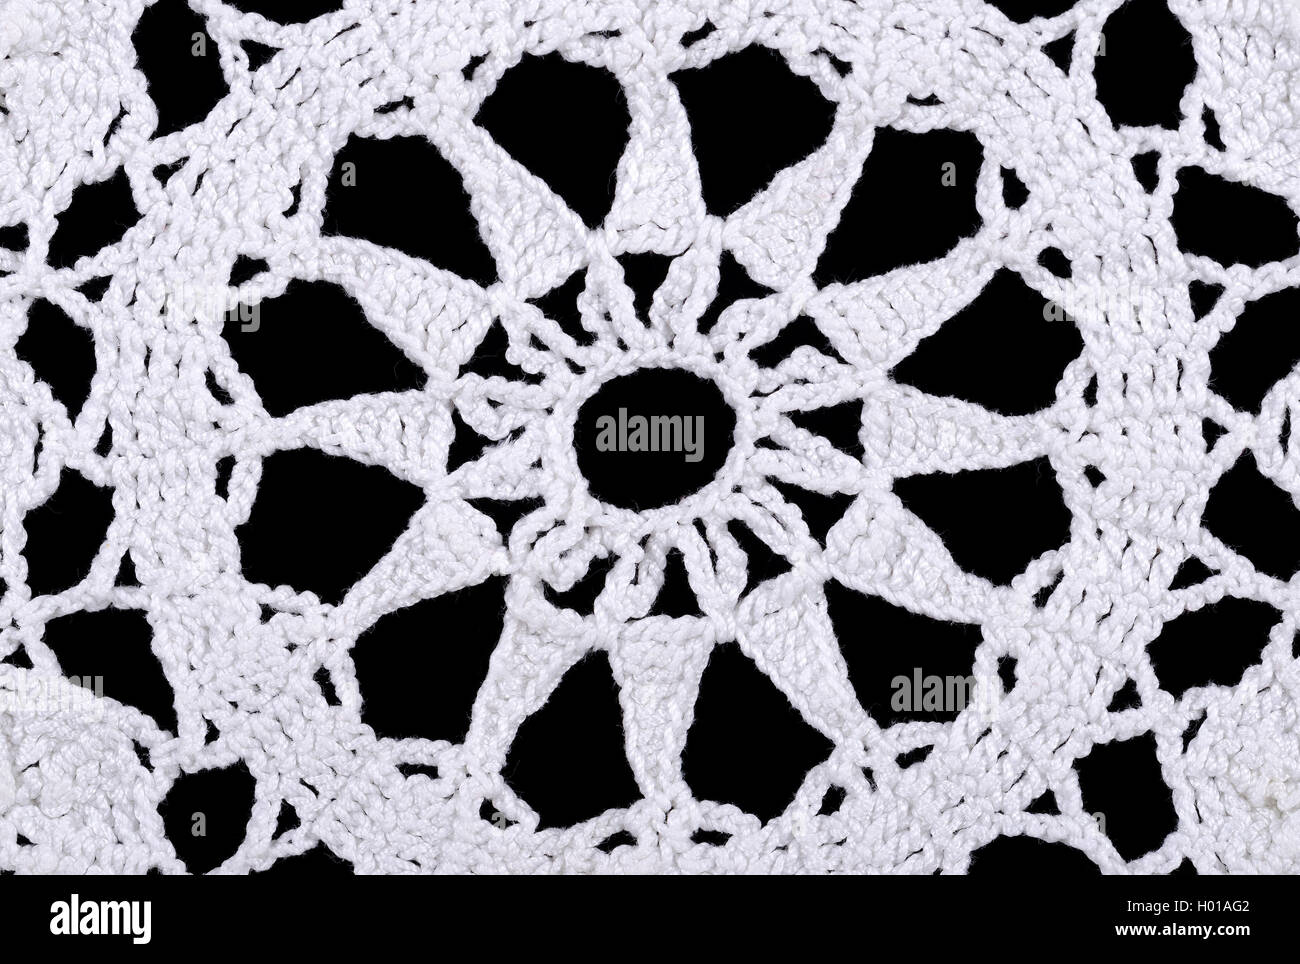 Star in a white crocheted doily. Crochet is a process of creating fabric by interlocking loops of yarn  using a crochet hook. Stock Photo